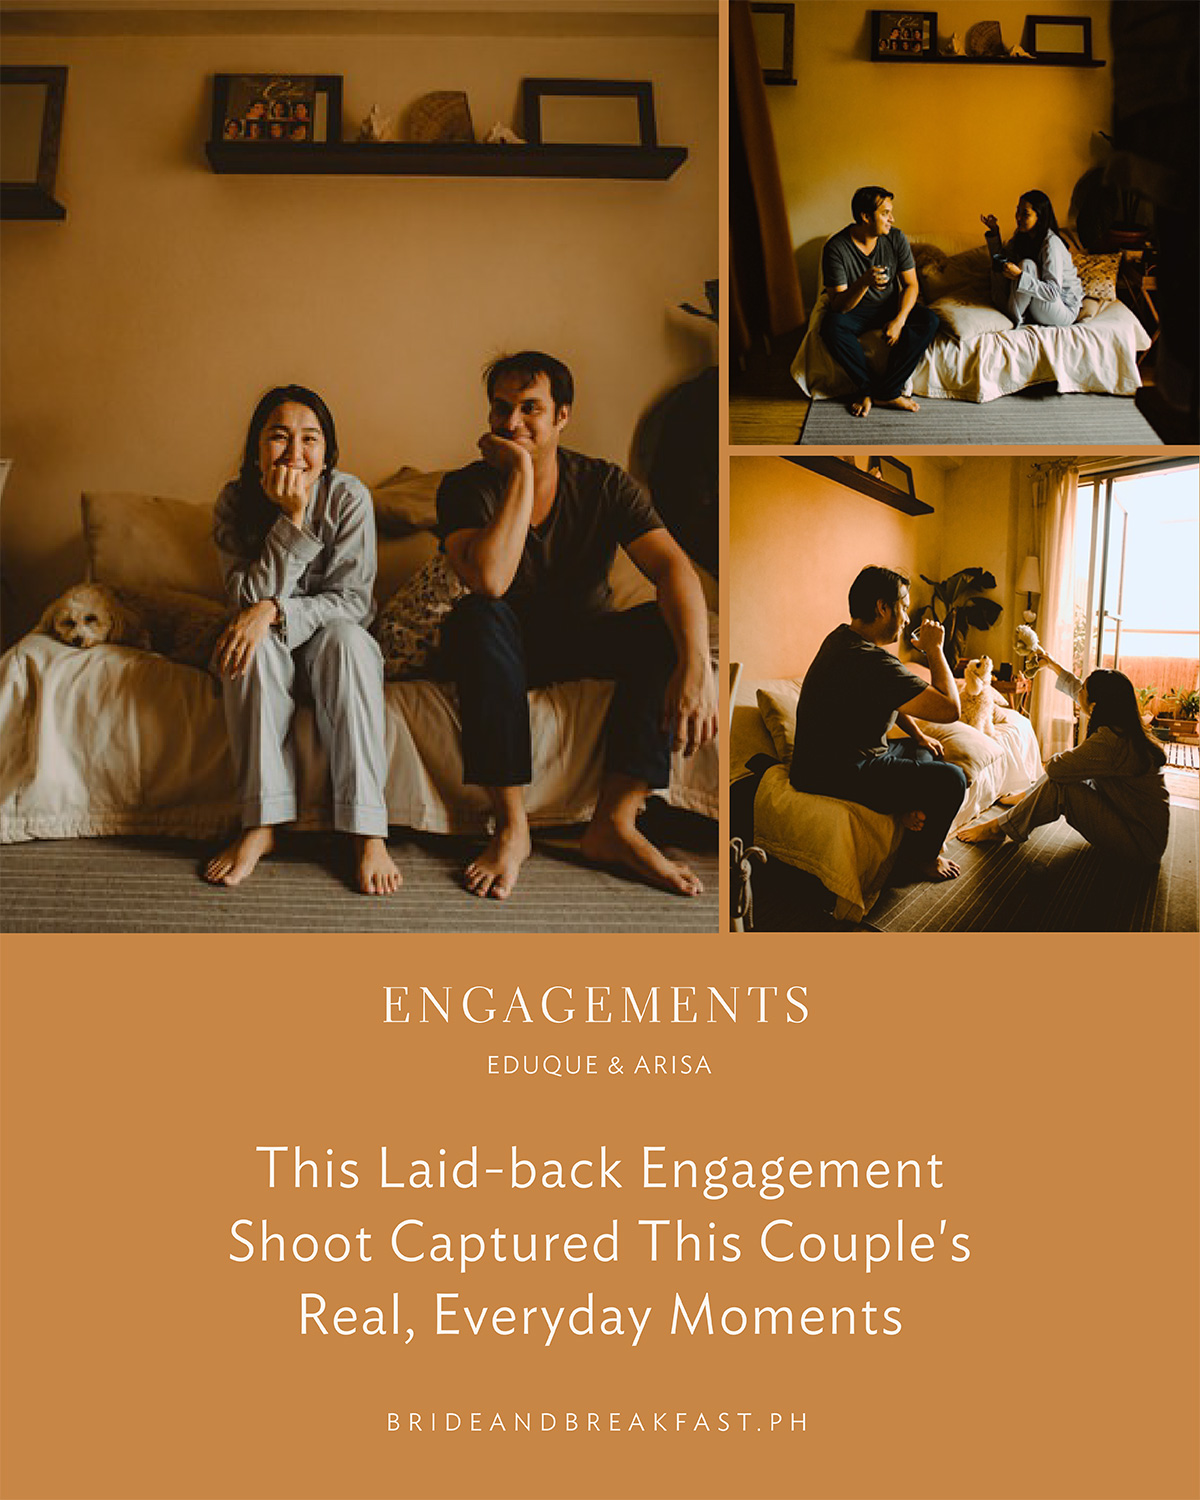 This Laid-back Engagement Shoot Captured This Couple's Real, Everyday Moments